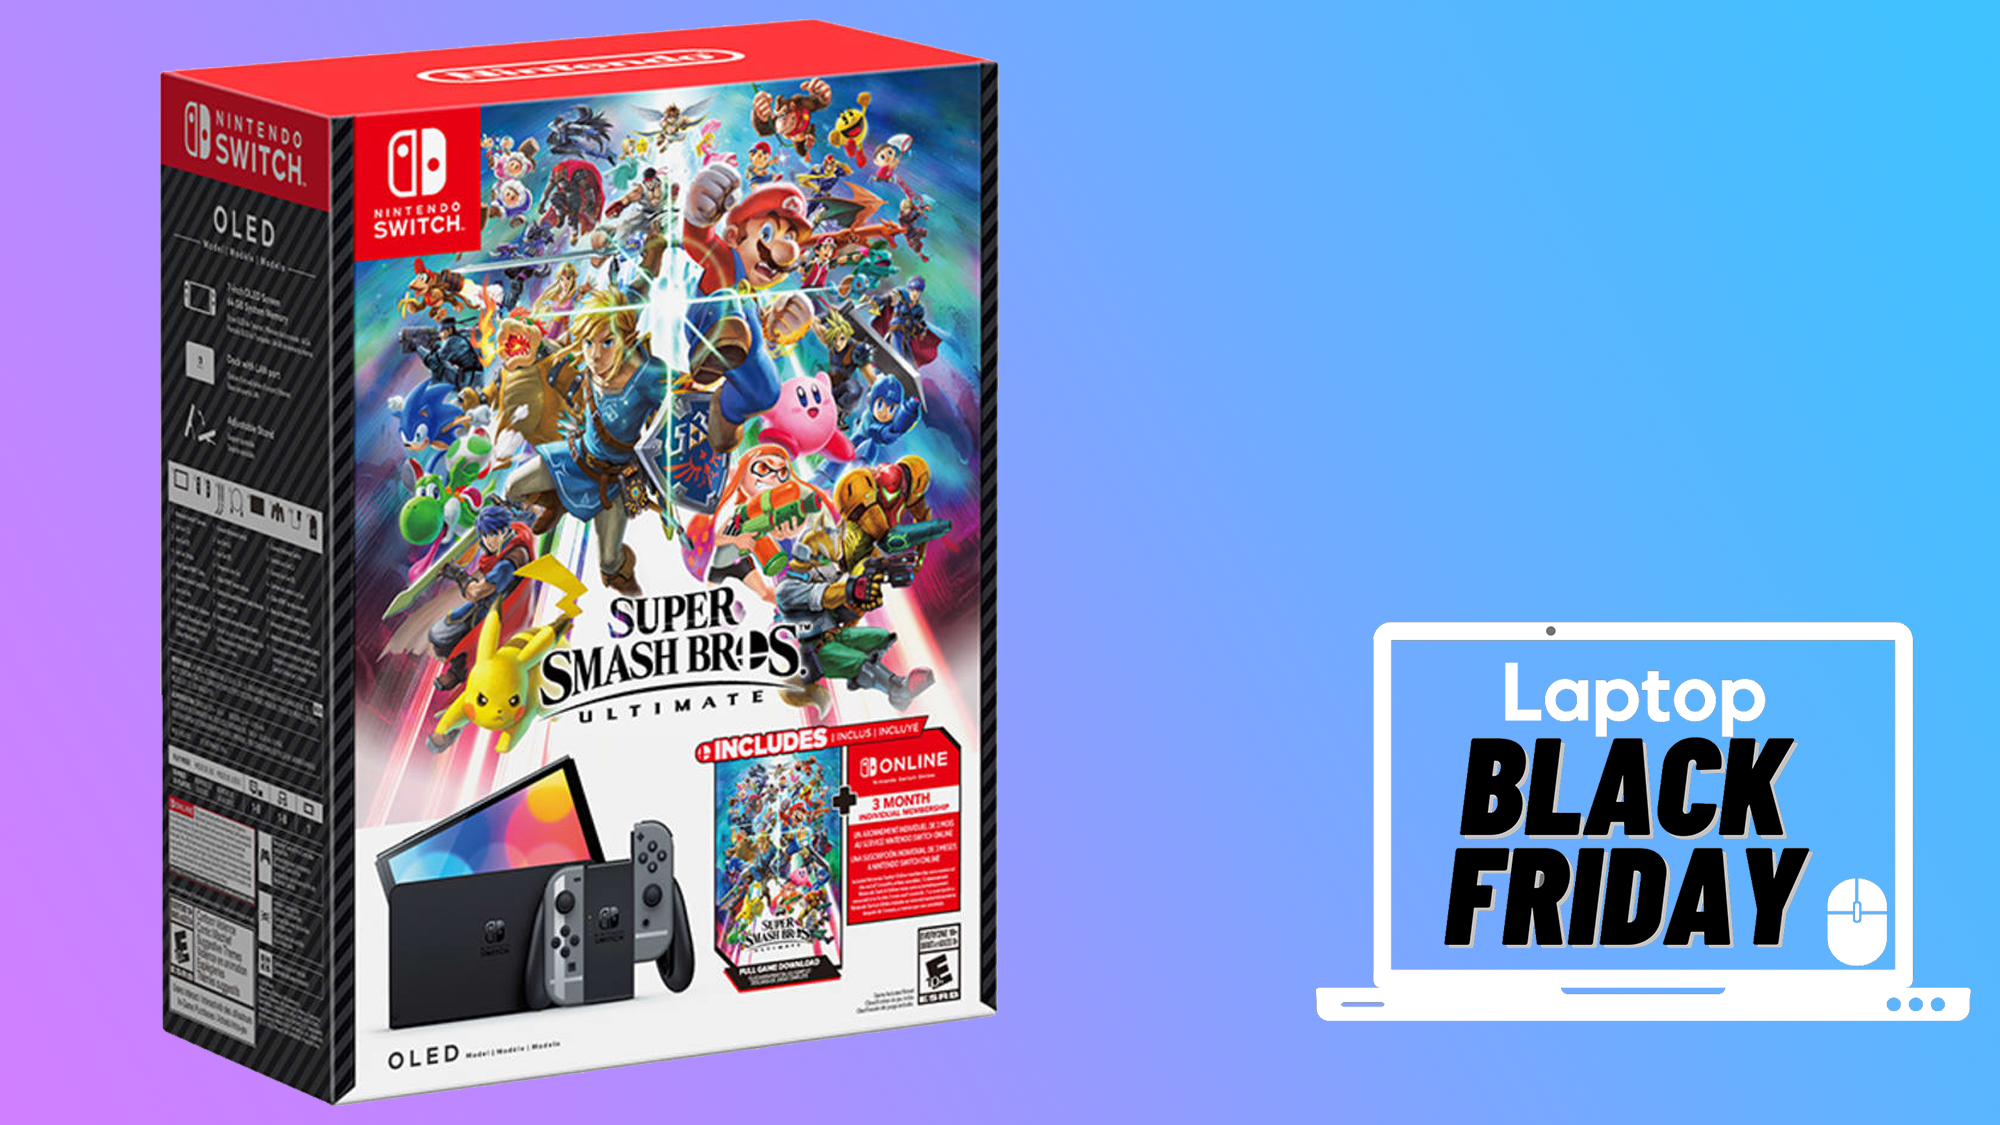 Where to buy these fantastic Nintendo Switch OLED bundles before Christmas